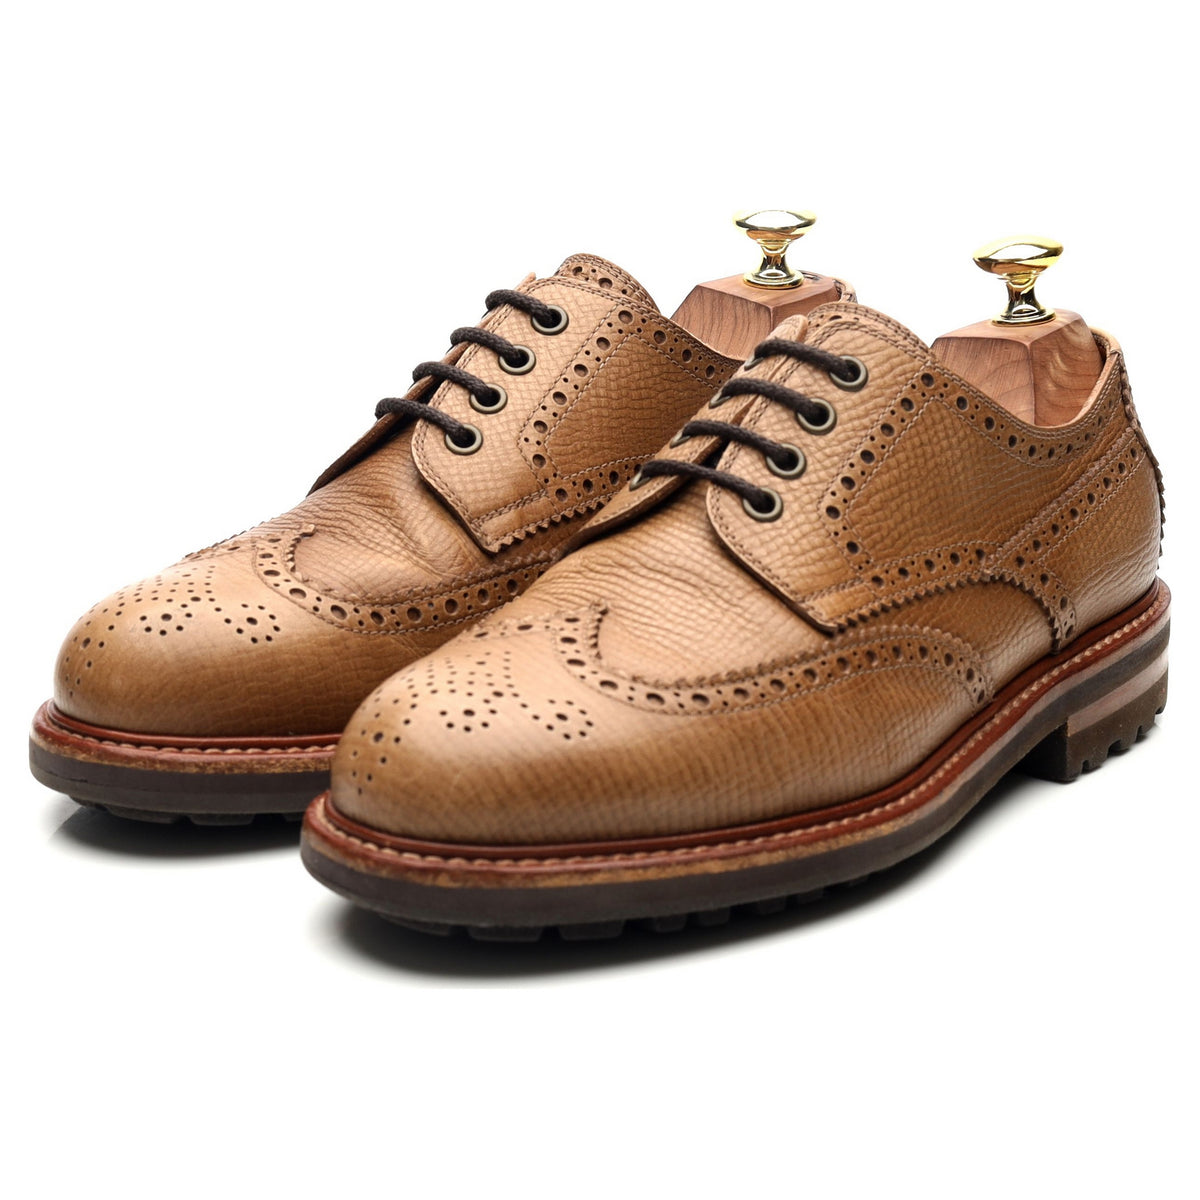 Light Brown Leather Derby Brogues UK 6.5 EU 40.5